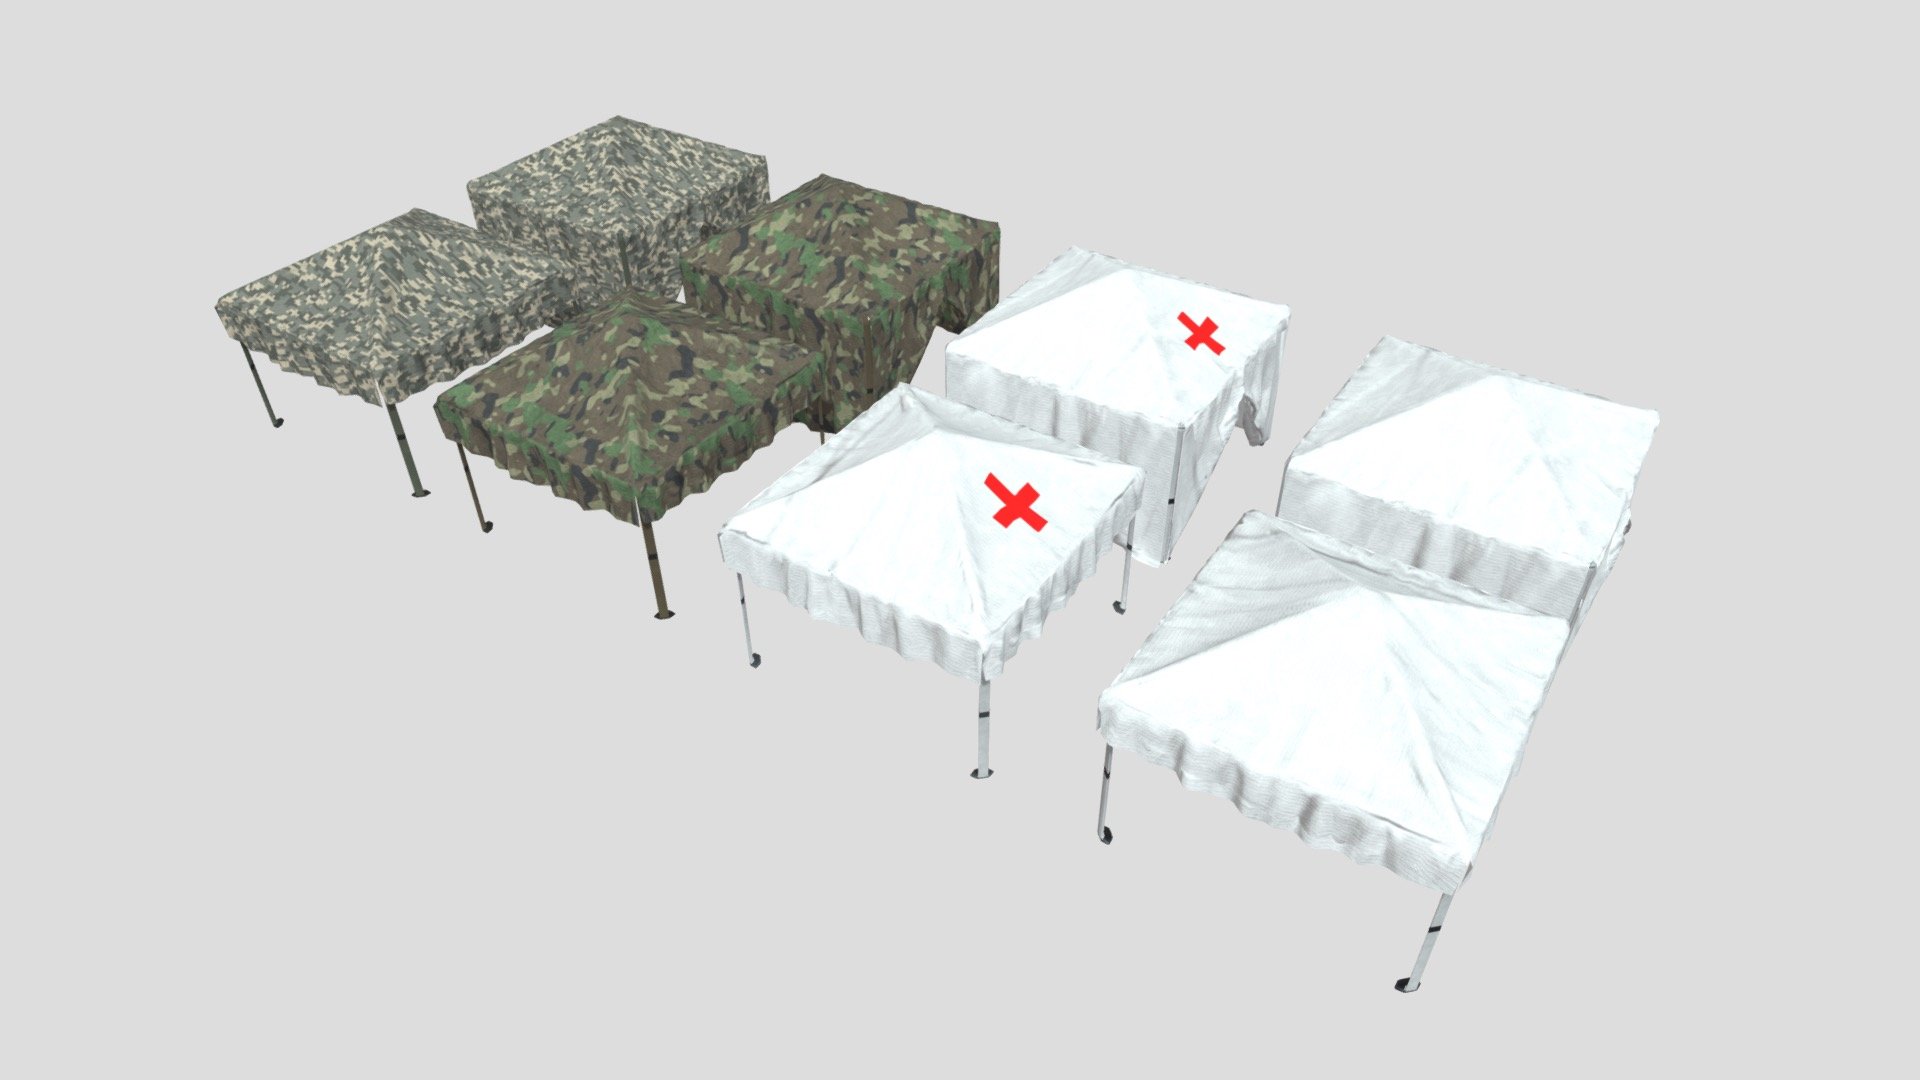 These Canopy Tents are perfect for any outdoor, military, or camping scene. The meshes come with 2K Texture sets and can be viewed from all angles and distances.

Highpoly Version INCLUDED in the .blend file.

This Includes:

The mesh (Tent Canopy CLOSED, Tent Canopy OPEN)
2K Texture sets (albedo, Metallic, Roughness, Normal, Height)
4 Variations (White Canopy, Medical Canopy, Woodland Camo, Digital Camo)
The mesh is UV Unwrapped with vertex colors for easy retexturing 3d model